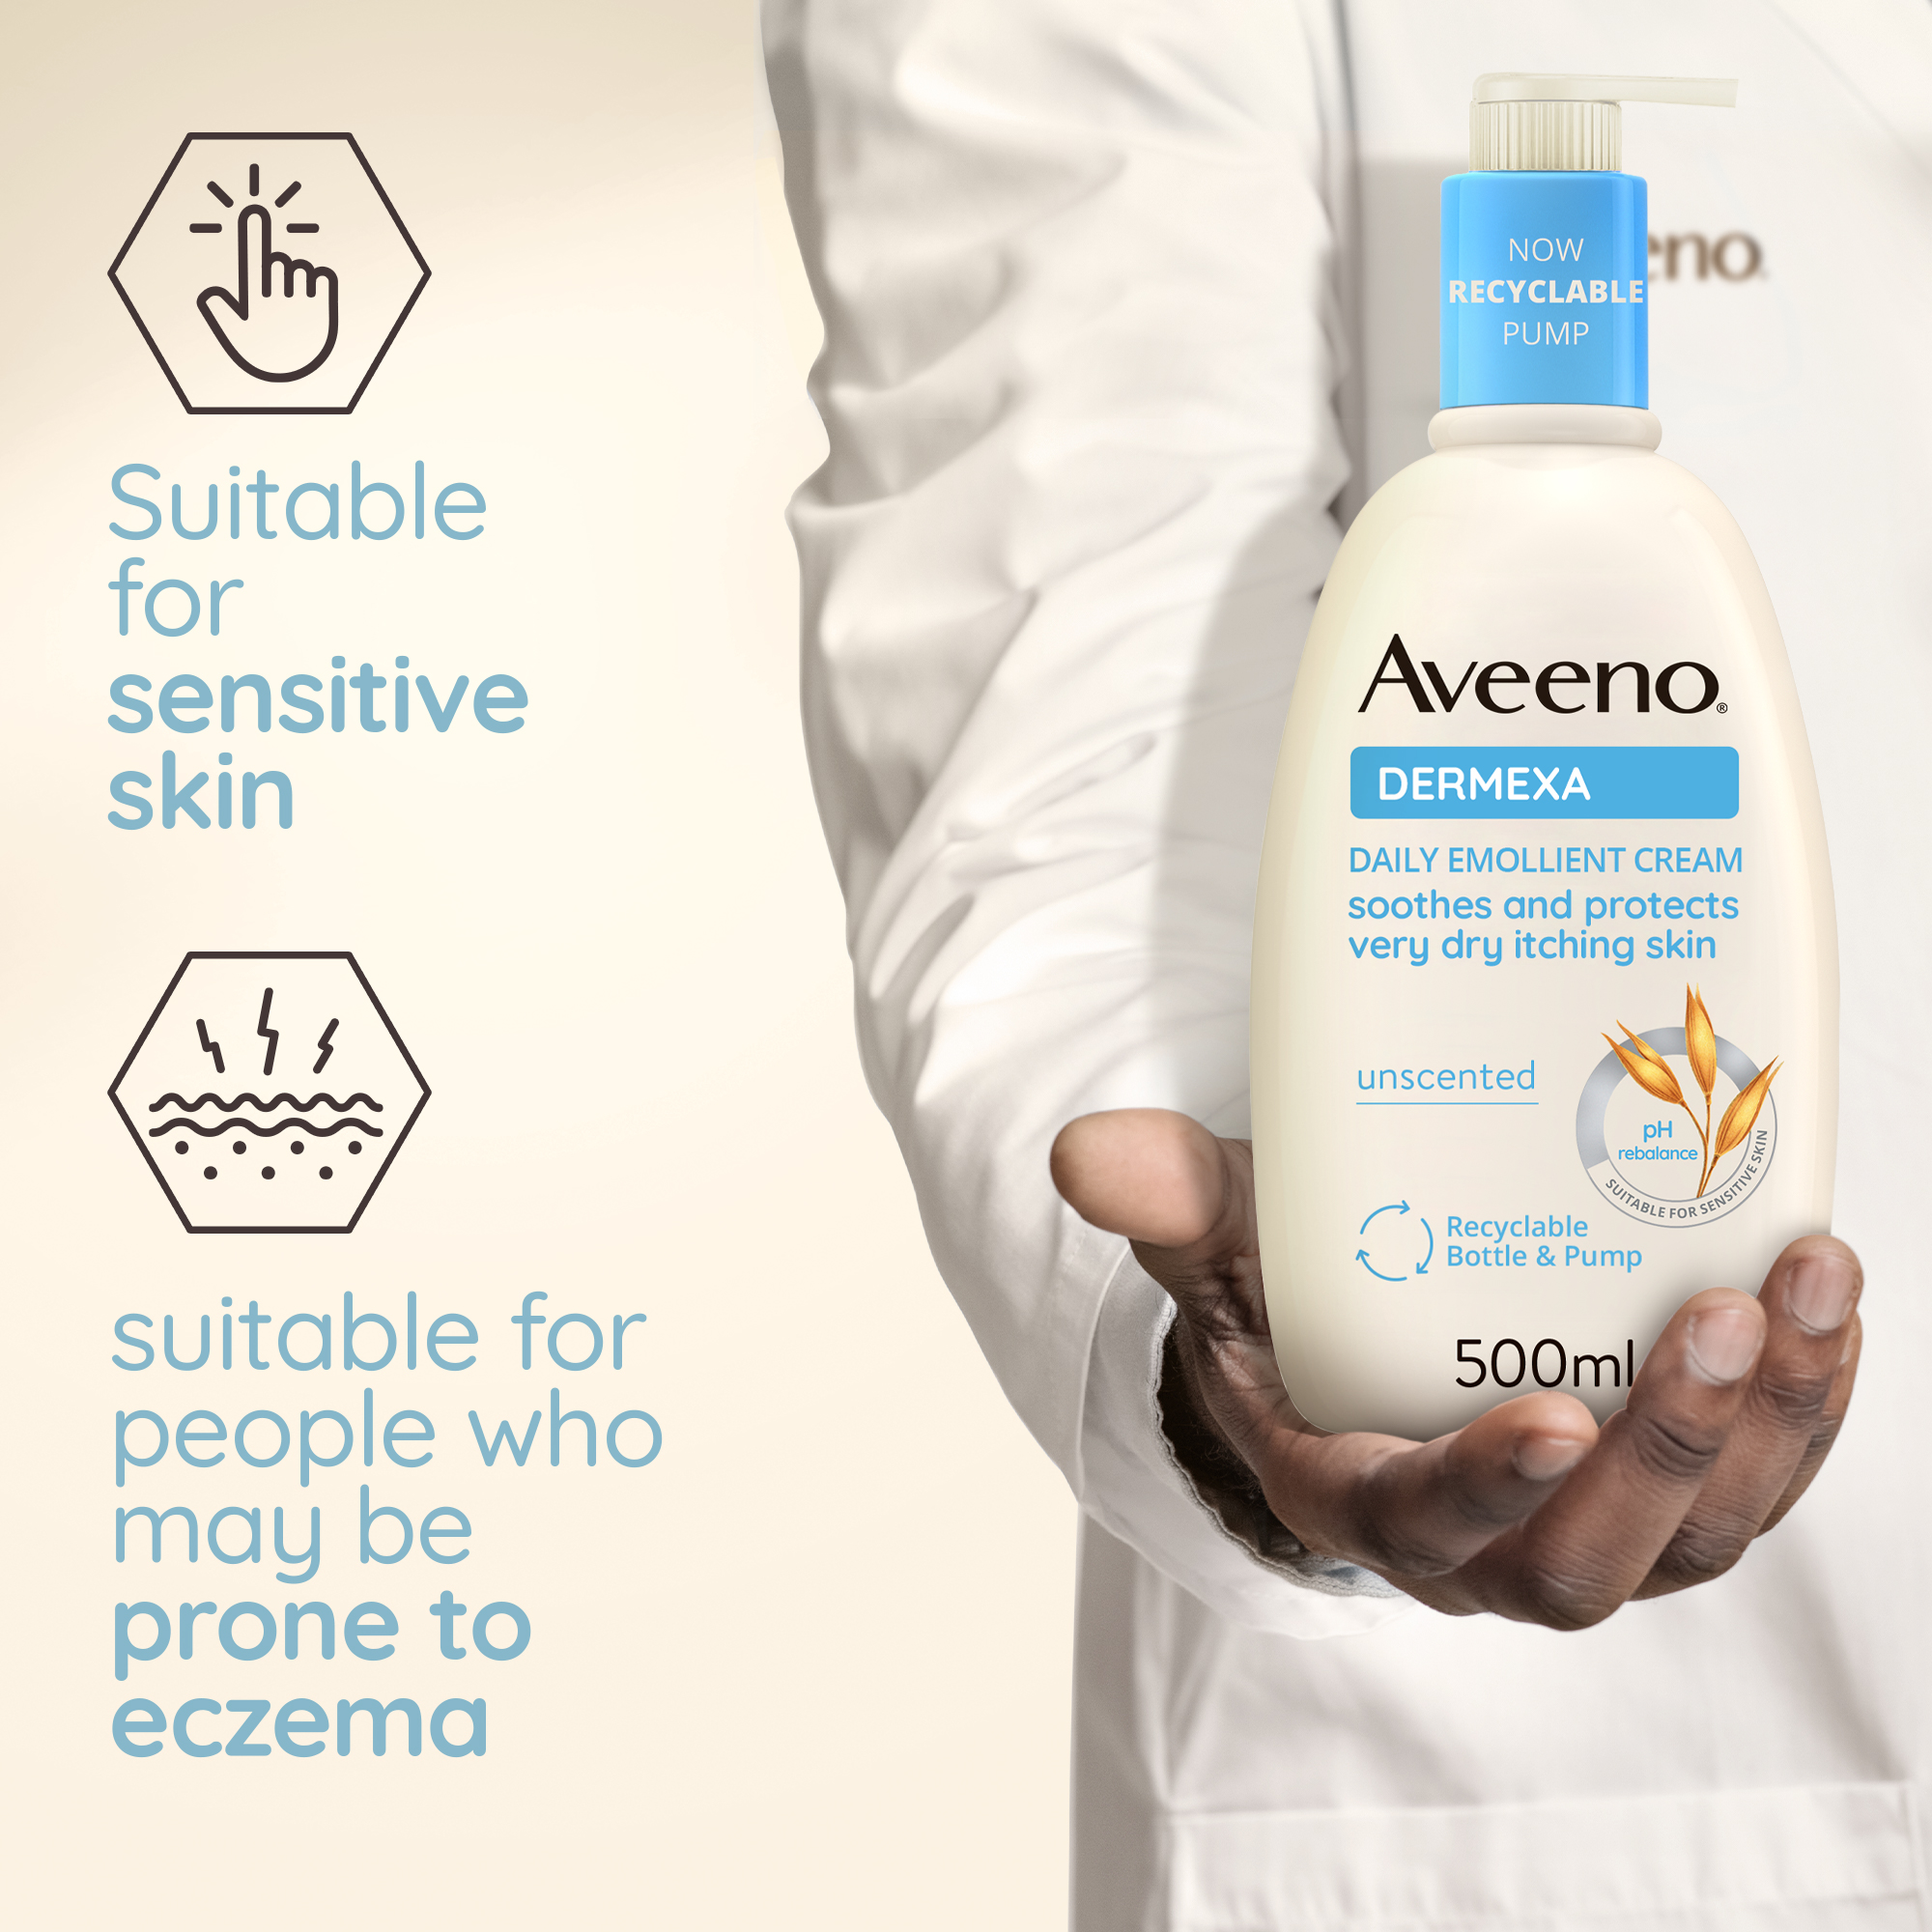 suitable for sensitive skin and for people who may be prone to eczema